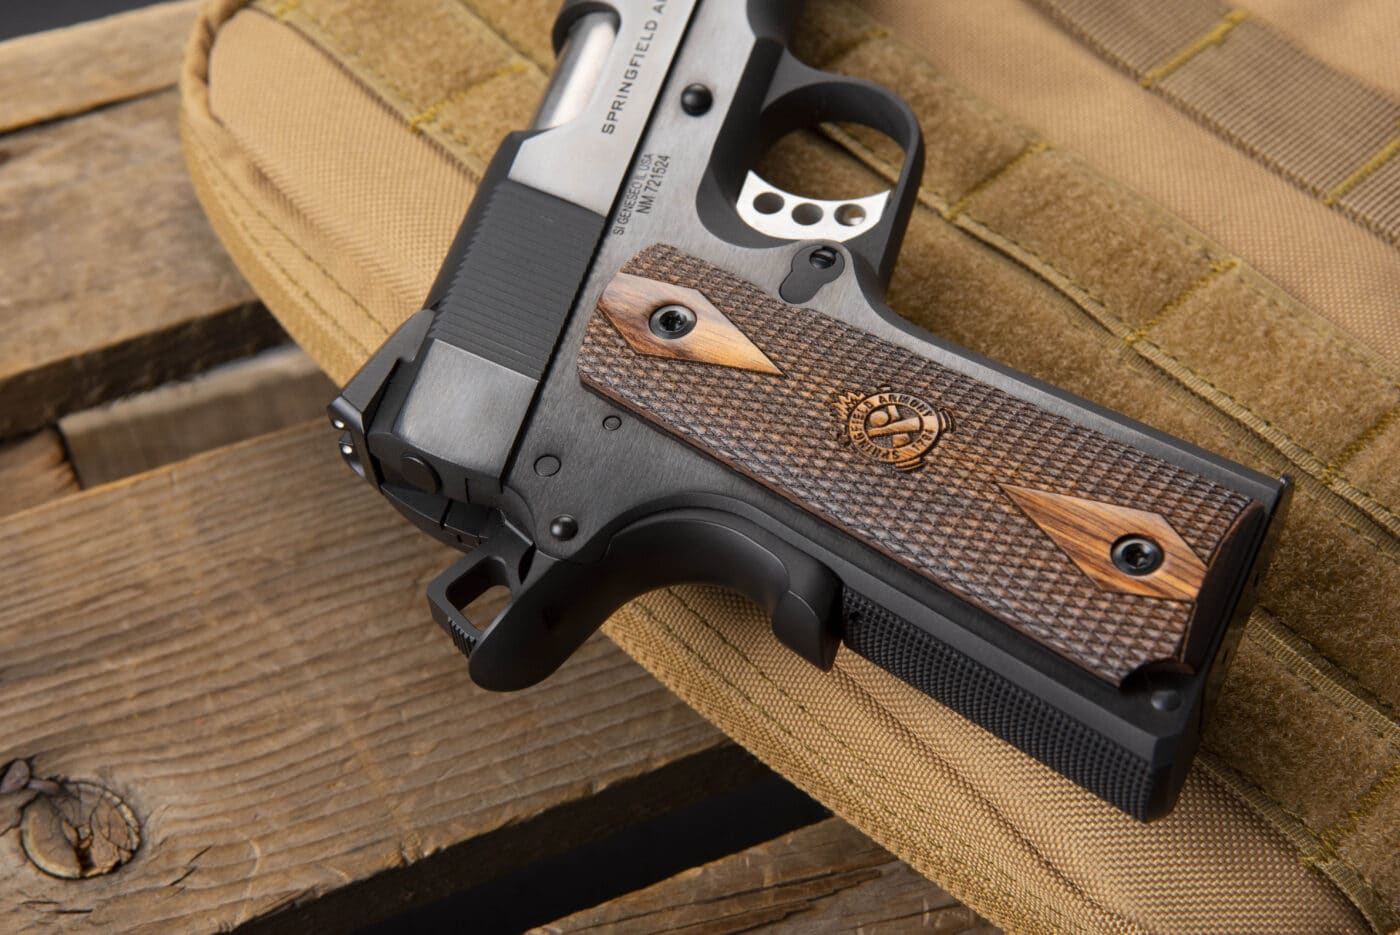 Rear angle view of the Springfield Armory Garrison 1911 pistol